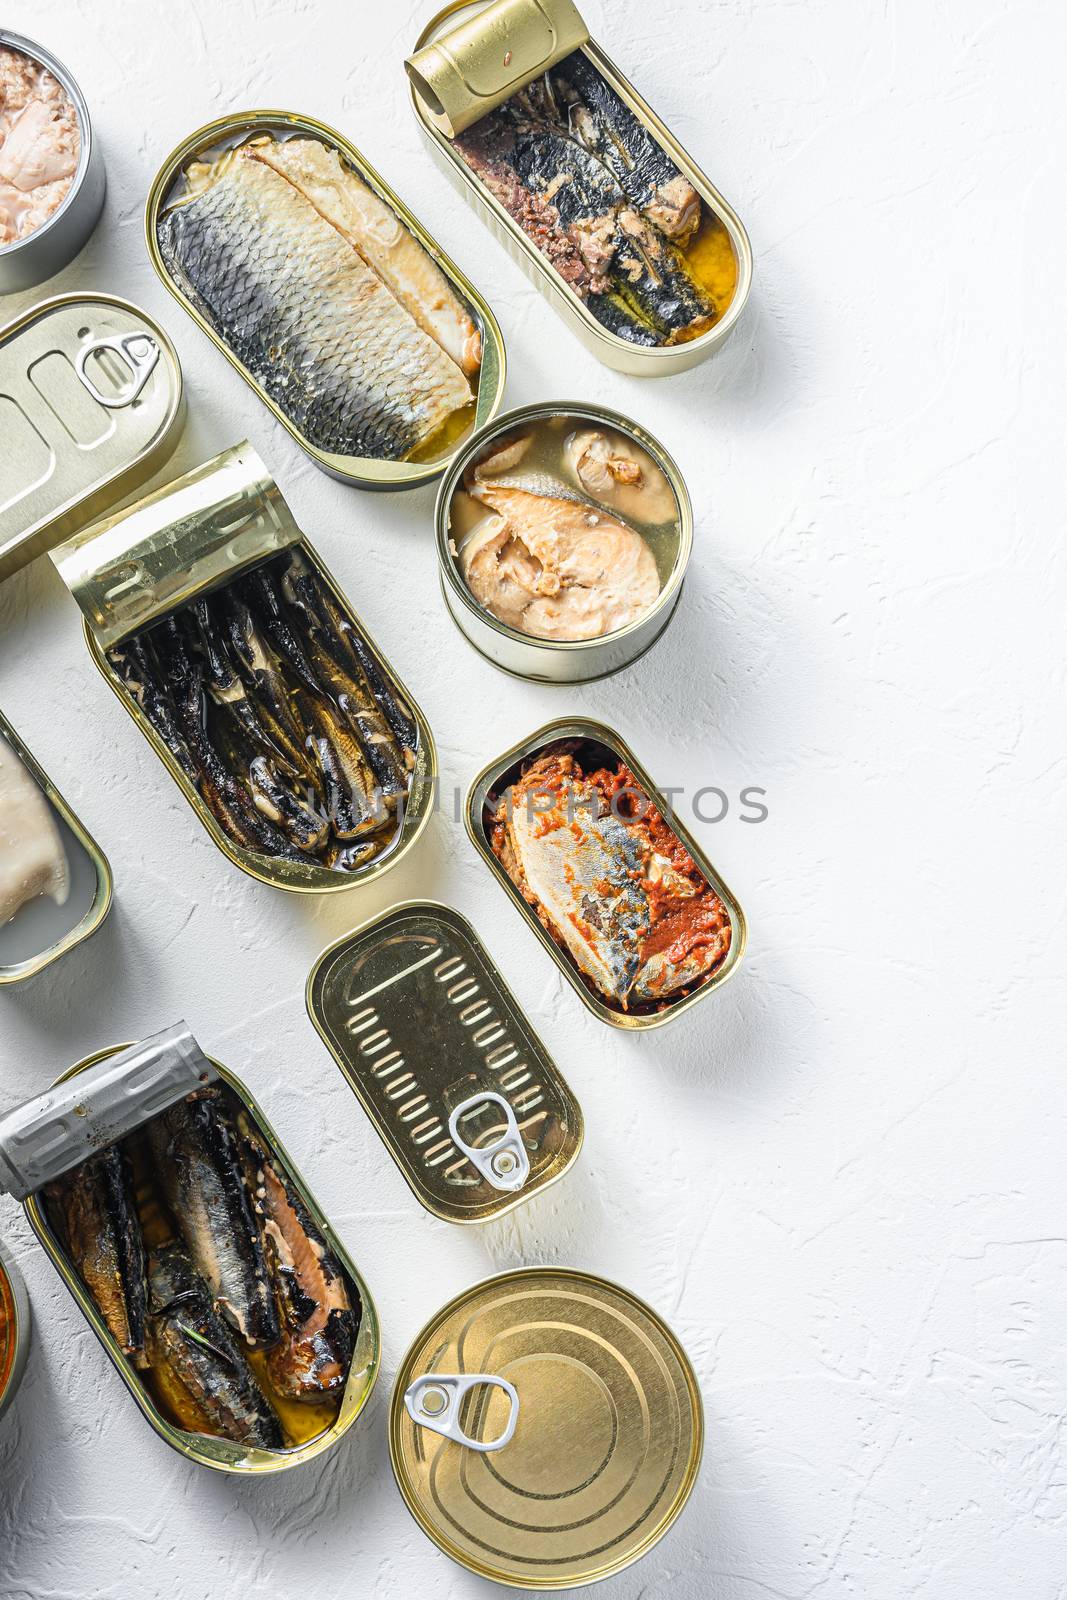 opened cans with different types of fish and seafood, opened and closed cans with Saury, mackerel, sprats, sardines, pilchard, squid, tuna, over white stone surface top view vertical space for text. by Ilianesolenyi